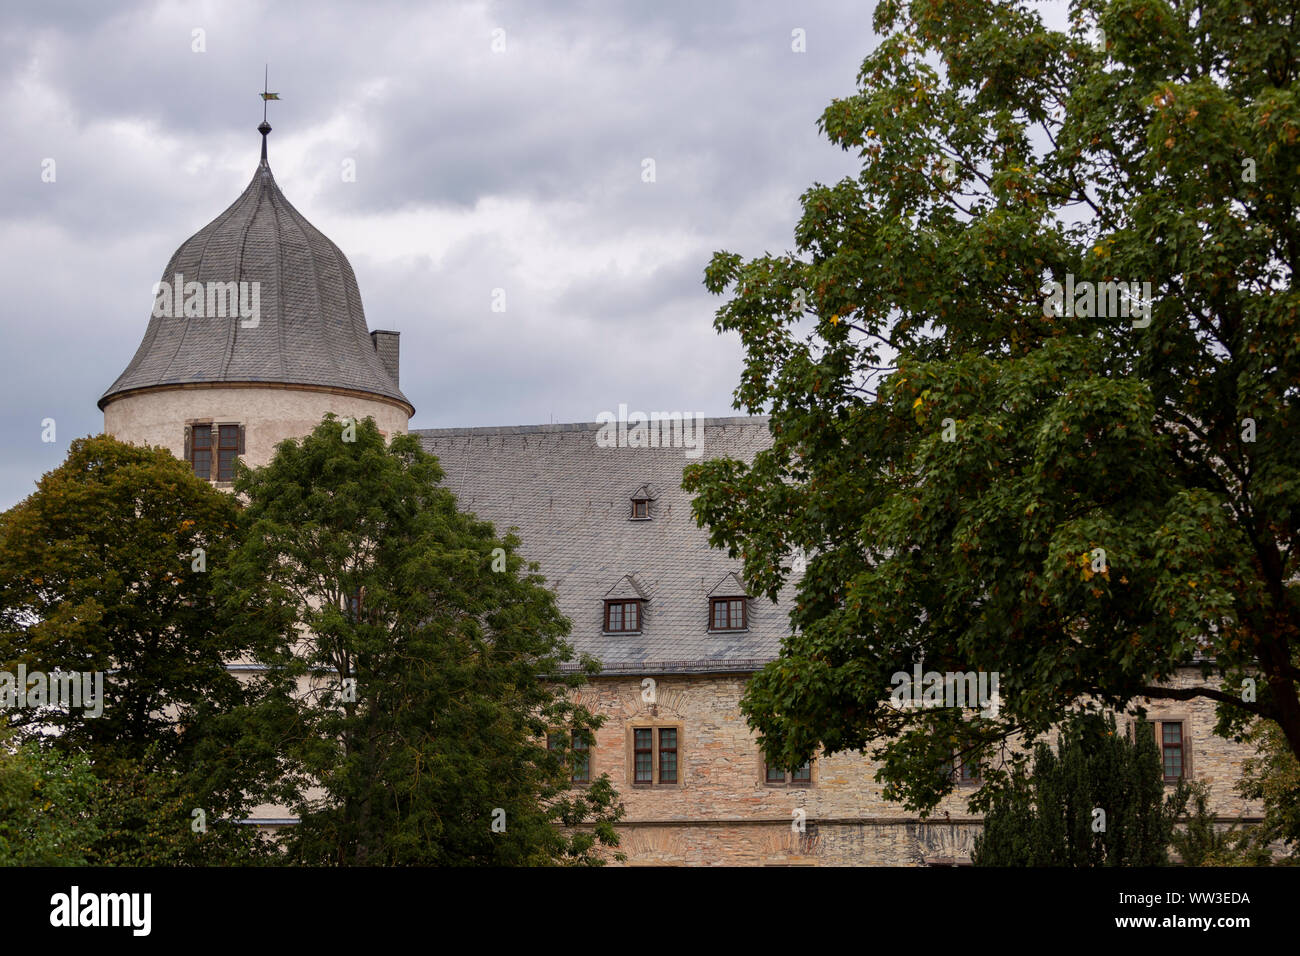 Wewelsburg castle behind the trees against an overcast cloudy sky Stock Photo